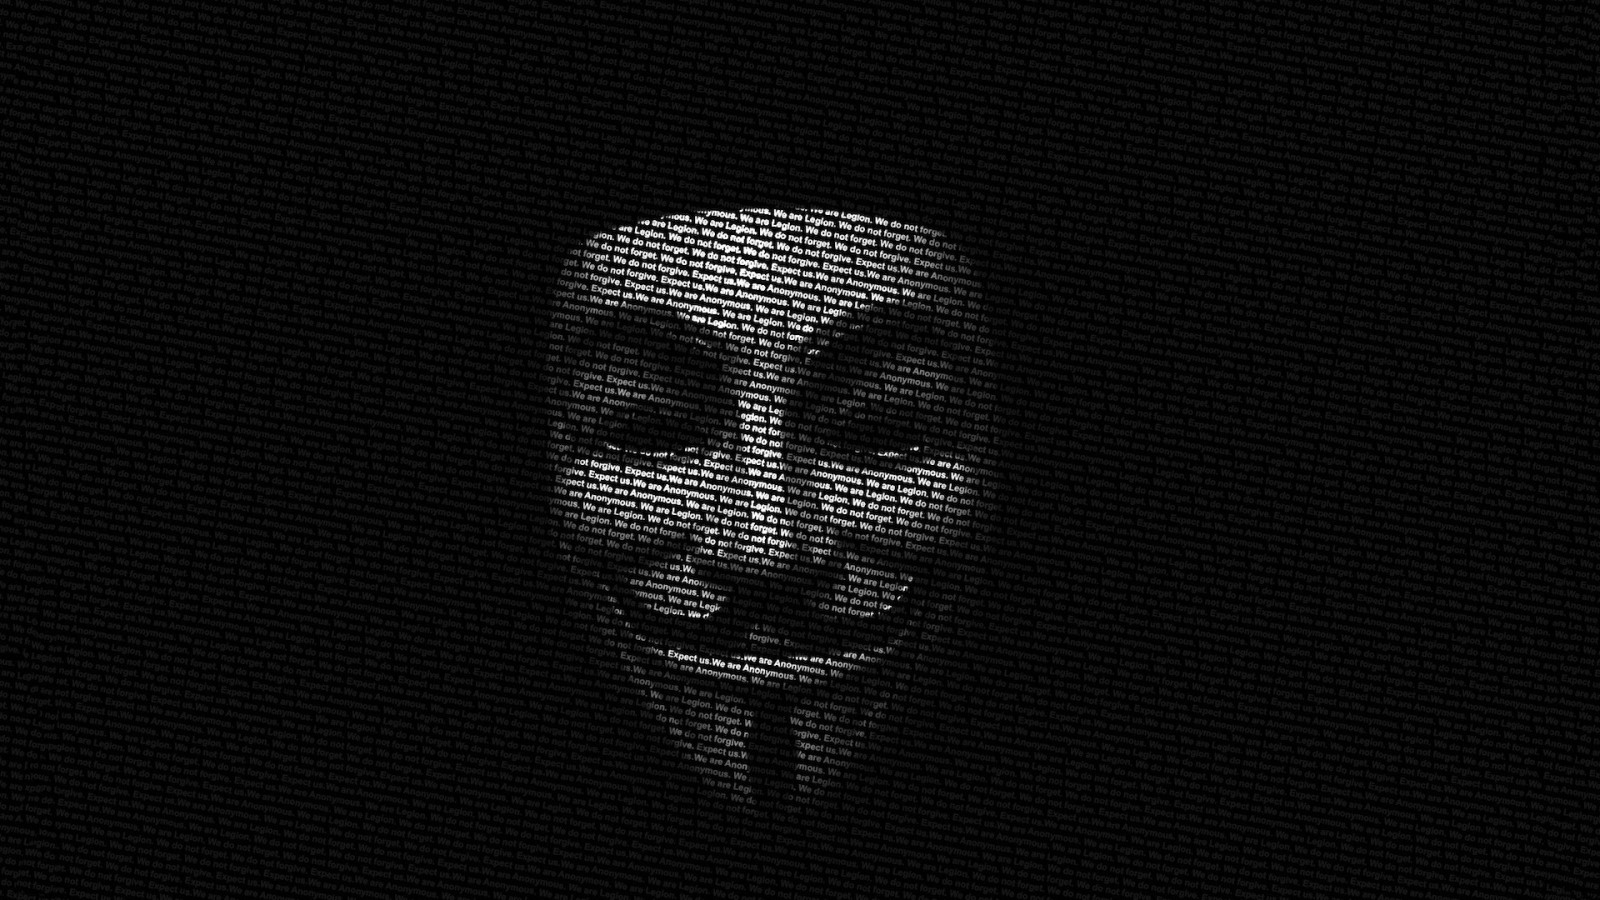 Wallpaper, black background, typography, text, logo, circle, Anonymous, typographic portraits, V for Vendetta, brand, darkness, screenshot, computer wallpaper, black and white, monochrome photography, font 1920x1080 Wallpaper